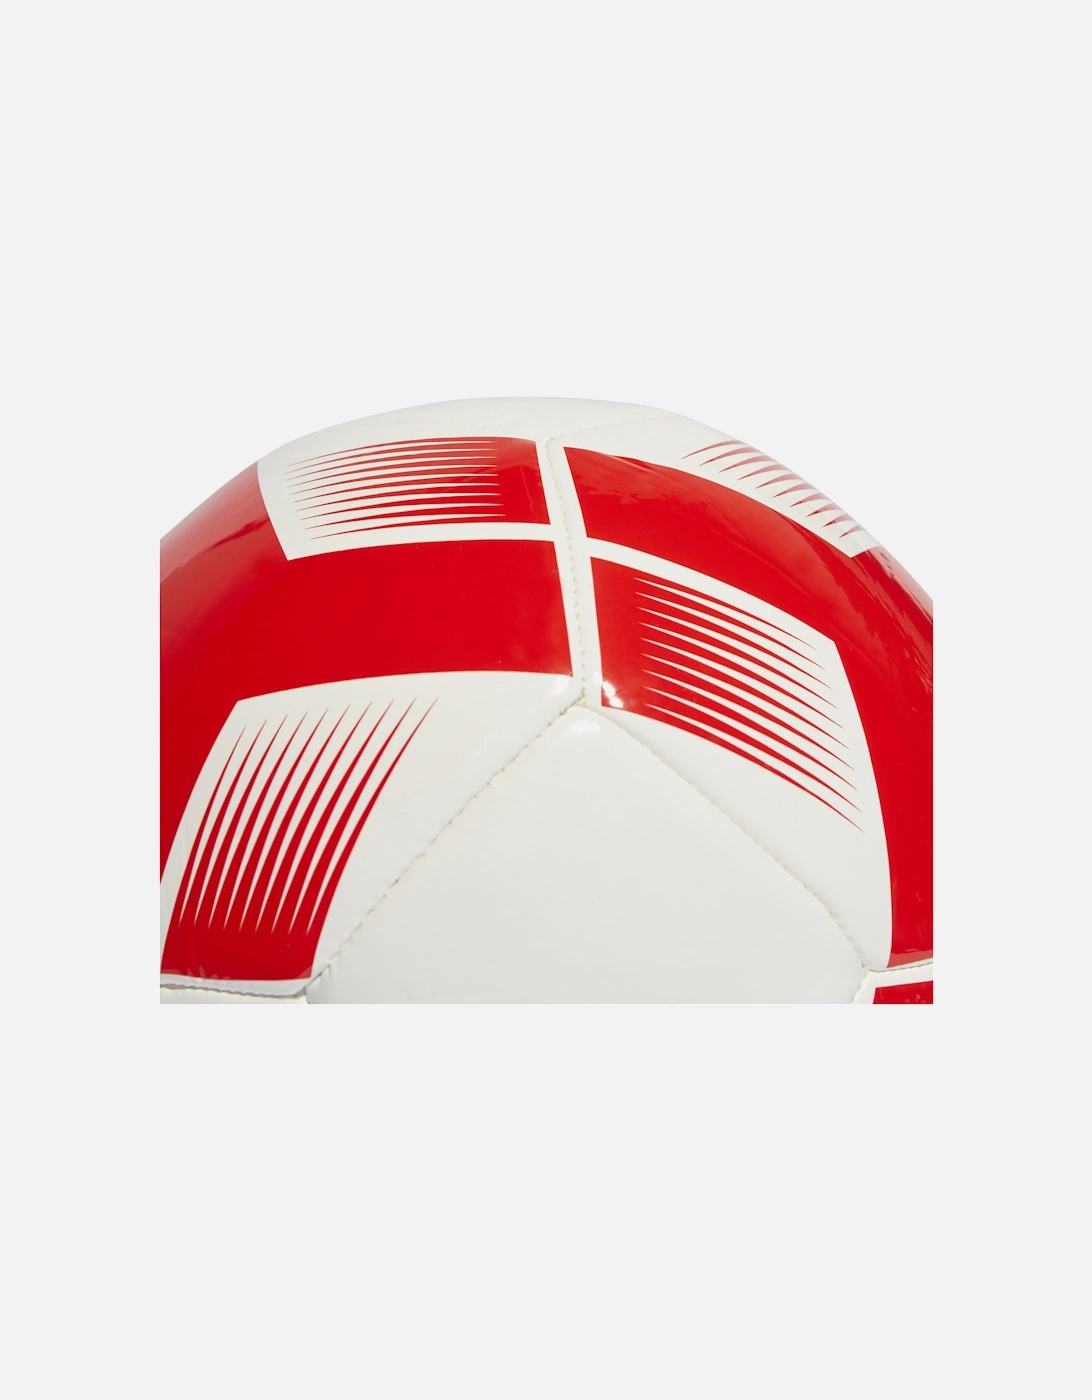 Starlancer Club Football (White/Red)